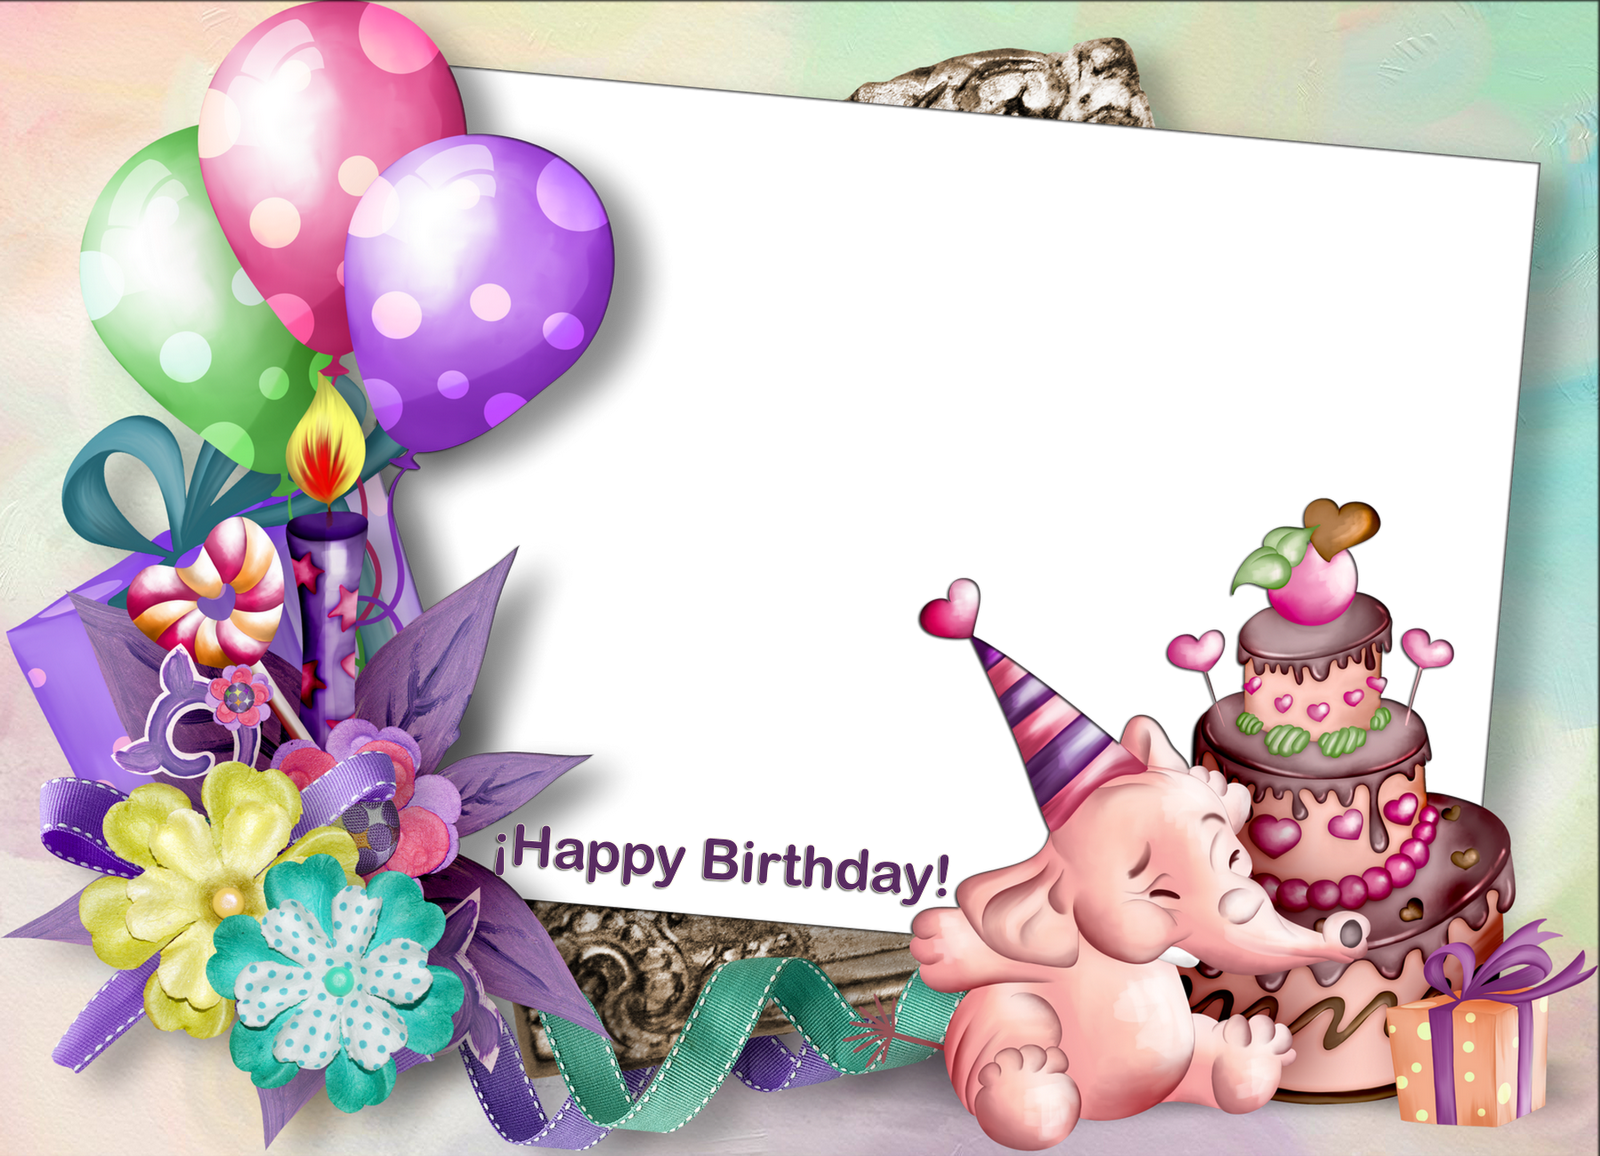 Download Frames Birthday Greetings Or Invitations - Happy Birthday Photo  Editor PNG Image with No Background 